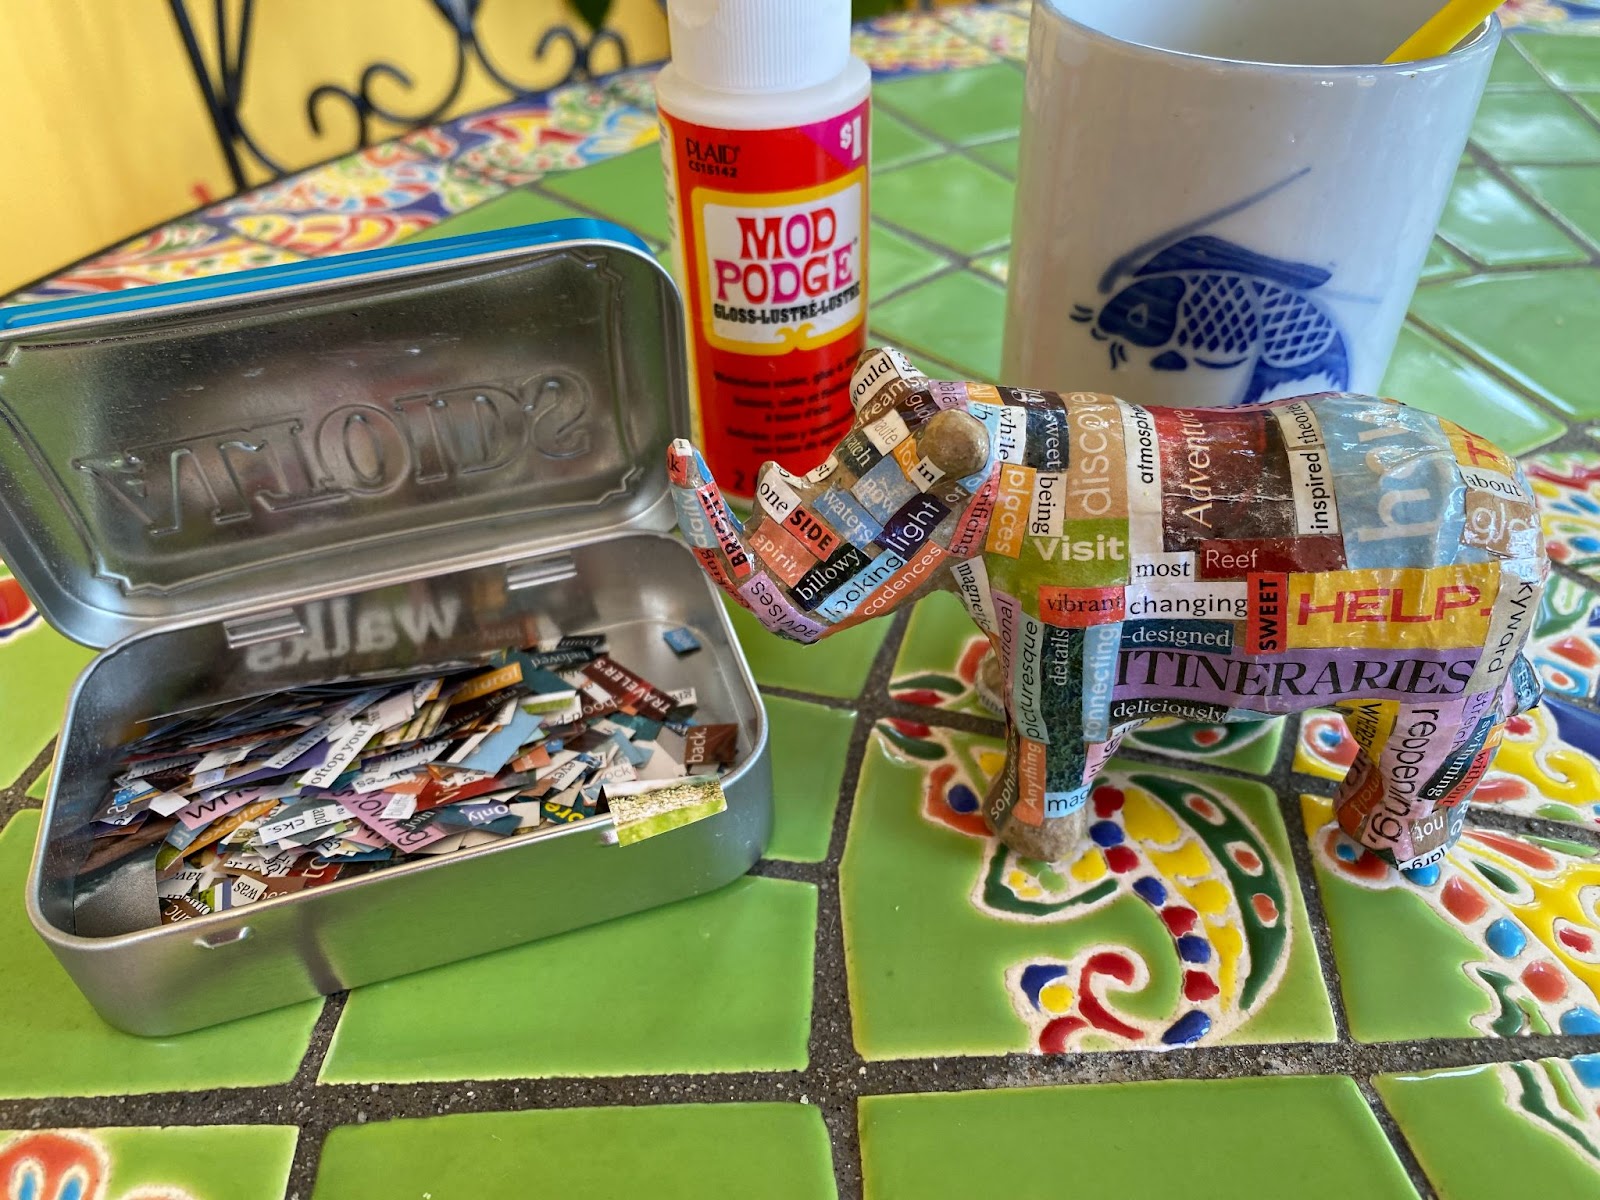 An Altoids tin full of cut out words, a little bottle of Mod Lodge, a cup with a paintbrush, and a pair mace rhinoceros covered in word collage.